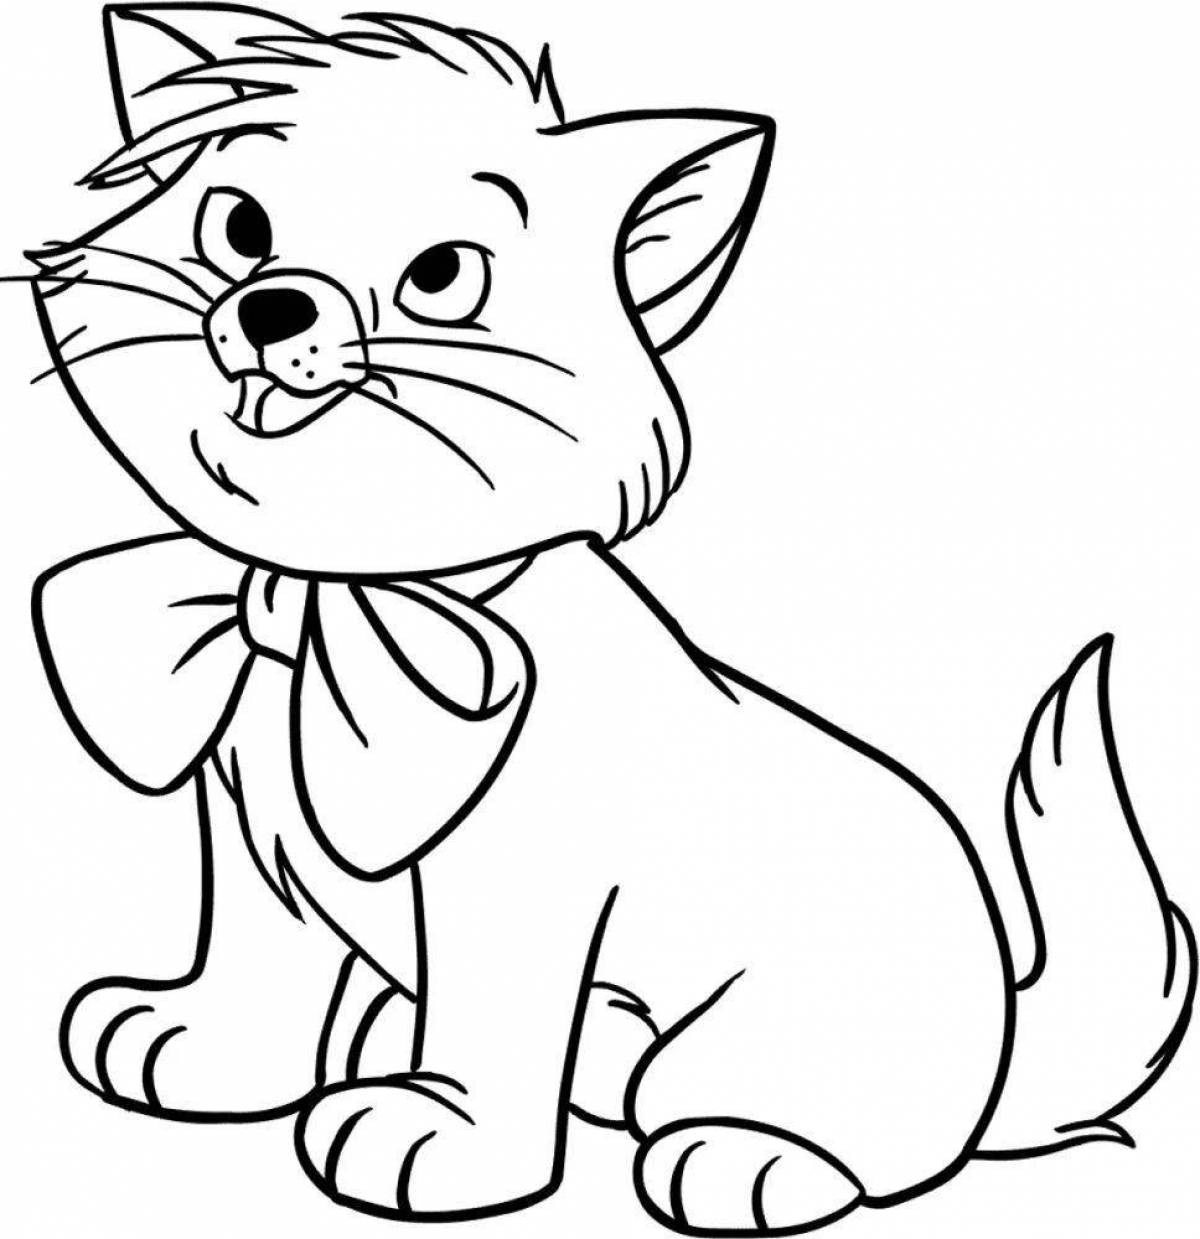 Fancy kitty coloring book for kids